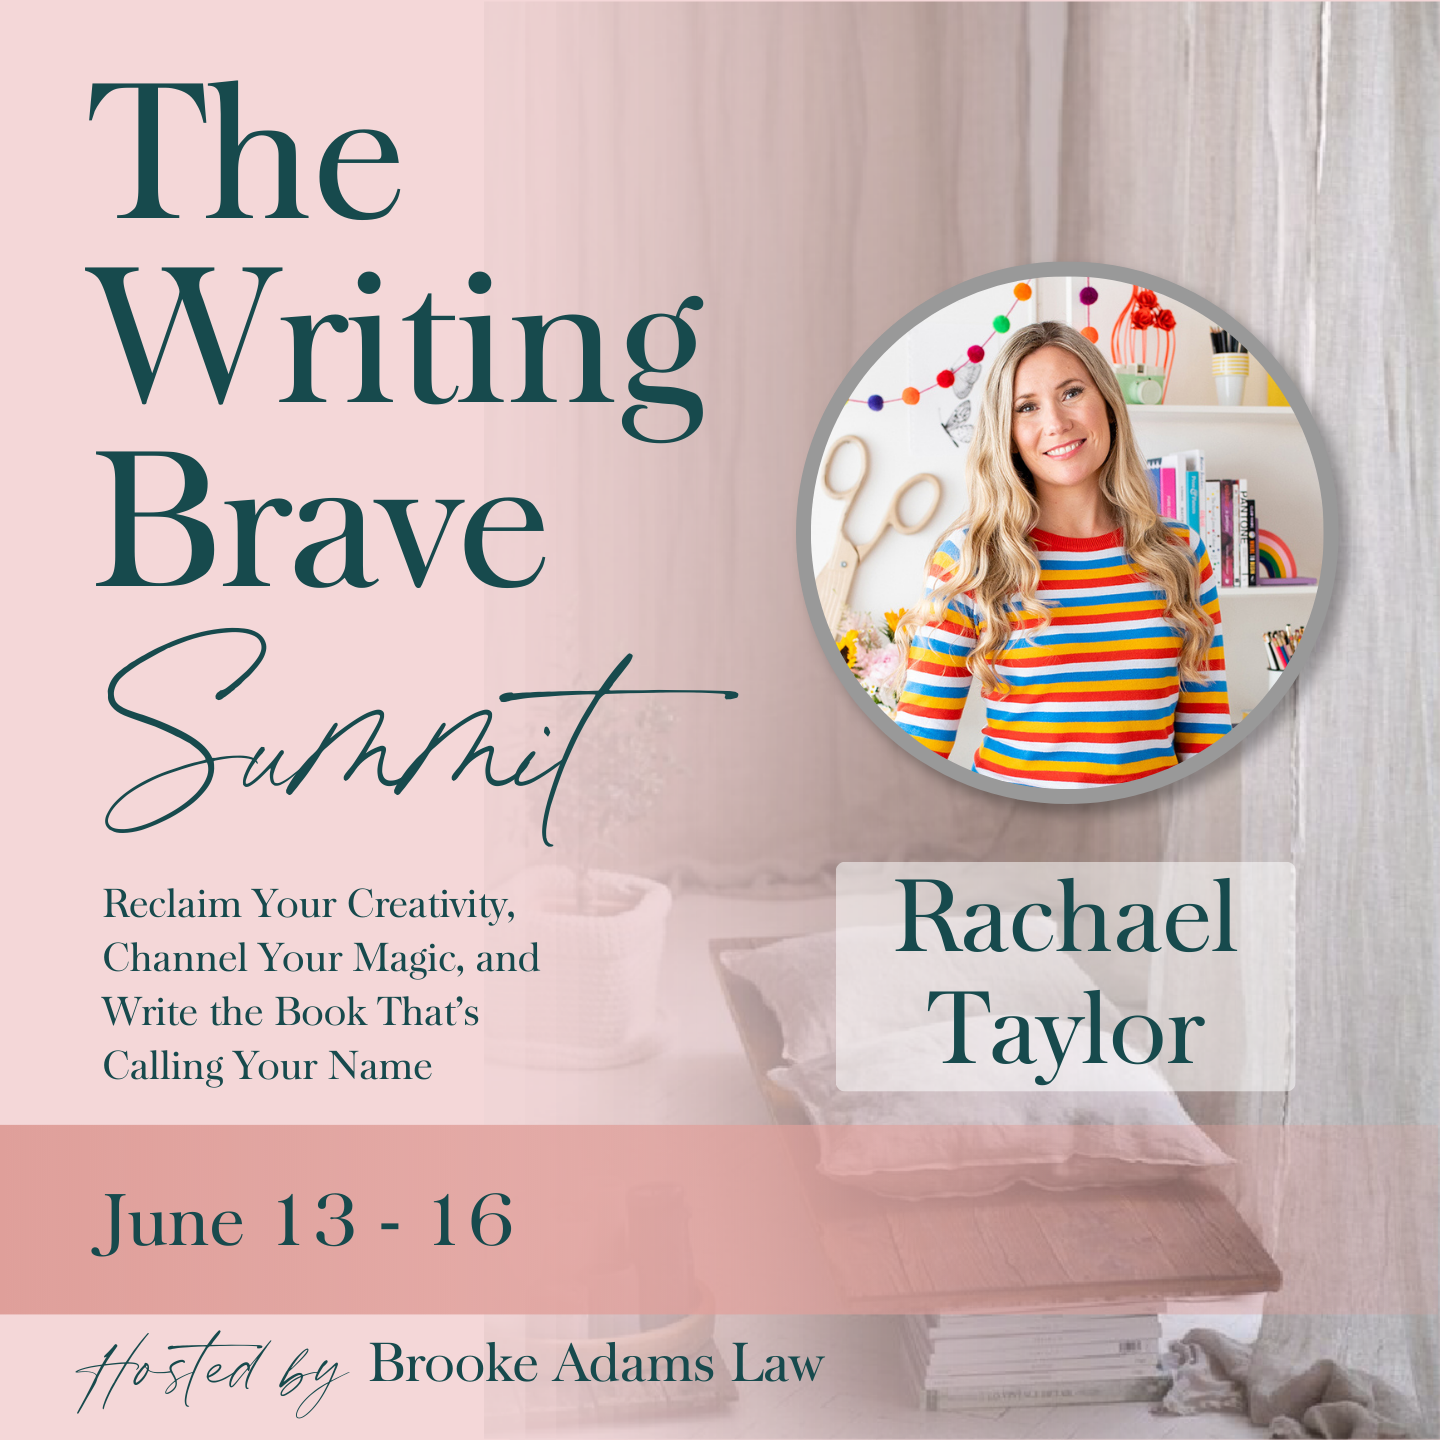 The Writing Brave Summit - join me!